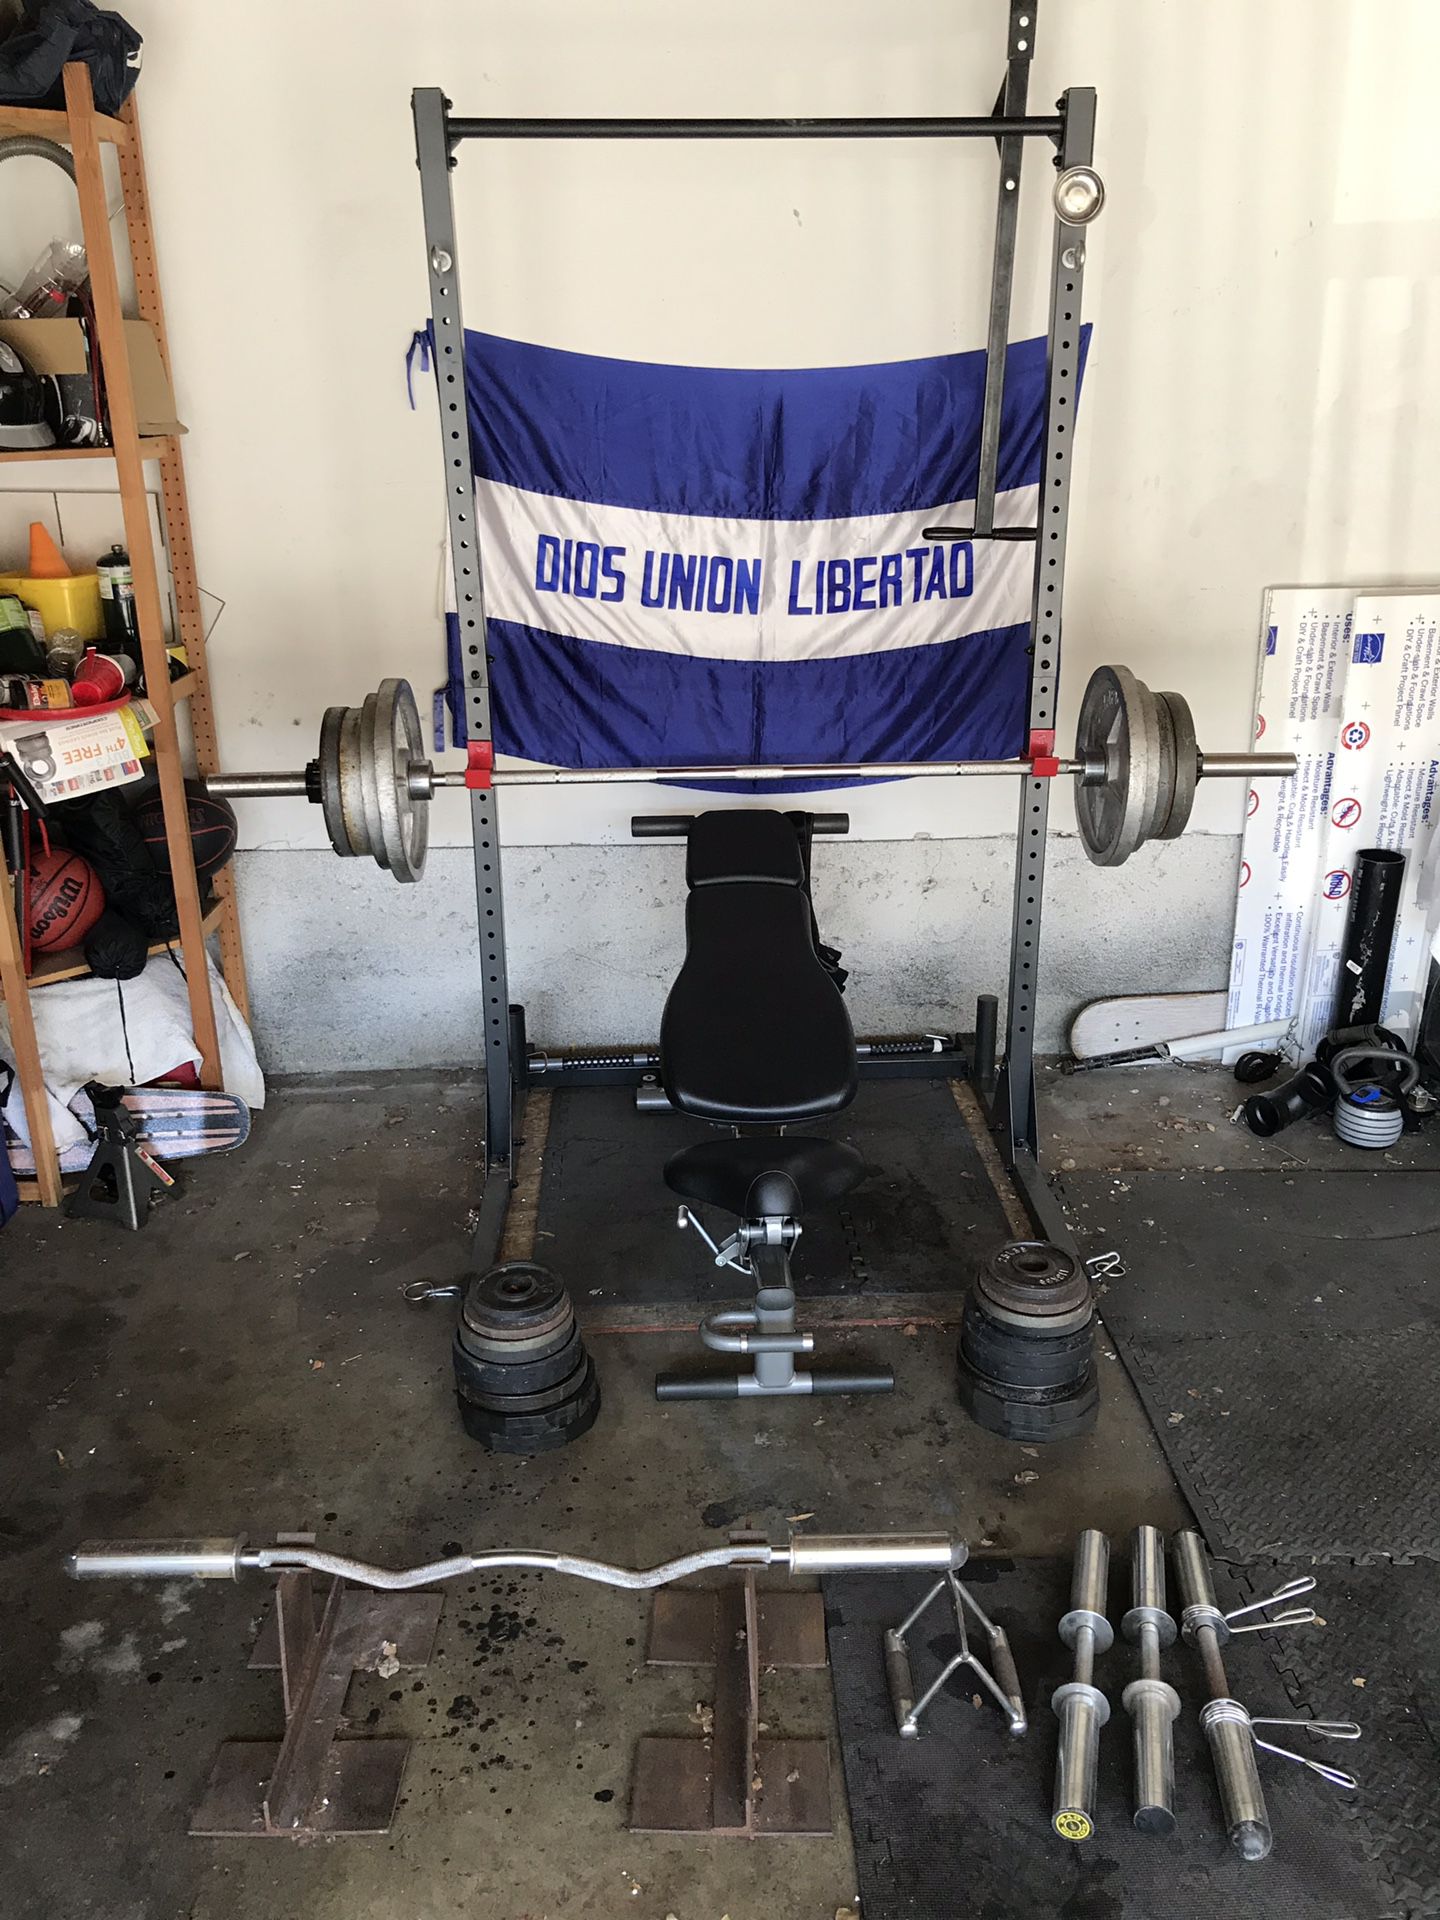 SQUAT RACK/PULL UP BAR /ADJUSTABLE BENCH PRESS/OLYMPIC WEIGHTS/EQUIPMENT